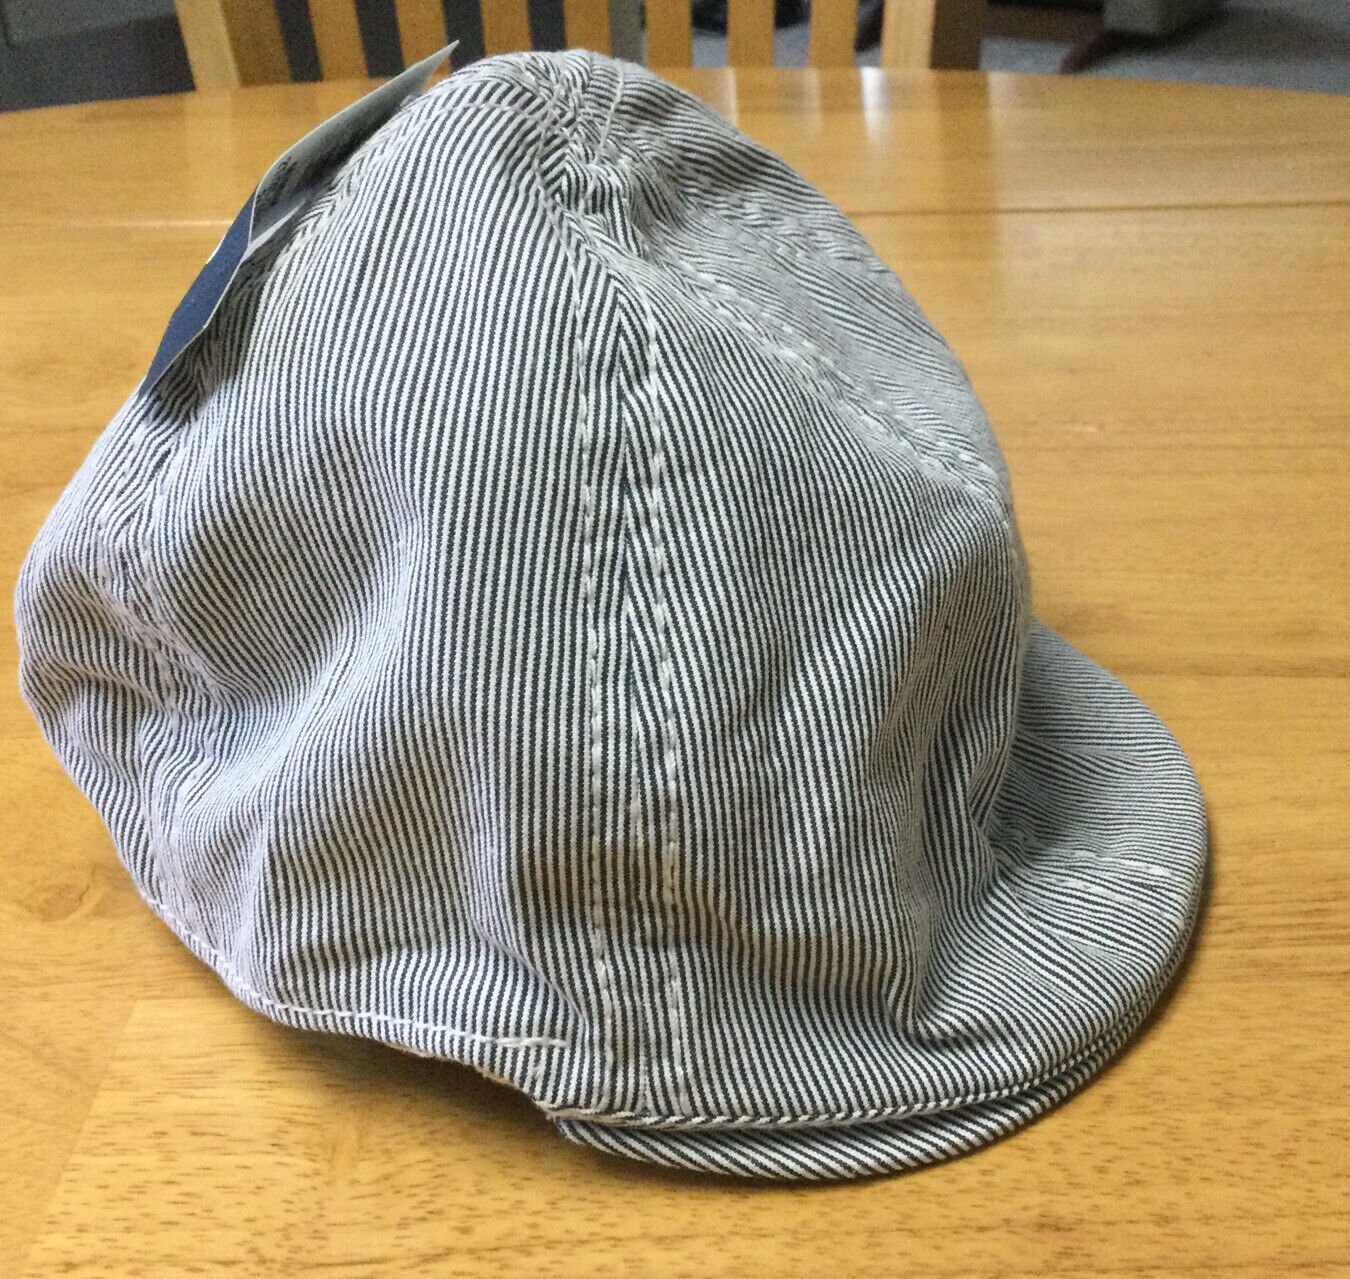 Old Navy Chambray Driving Cap Regular store Fashion Boys Small M Railroad Size 2T-3T